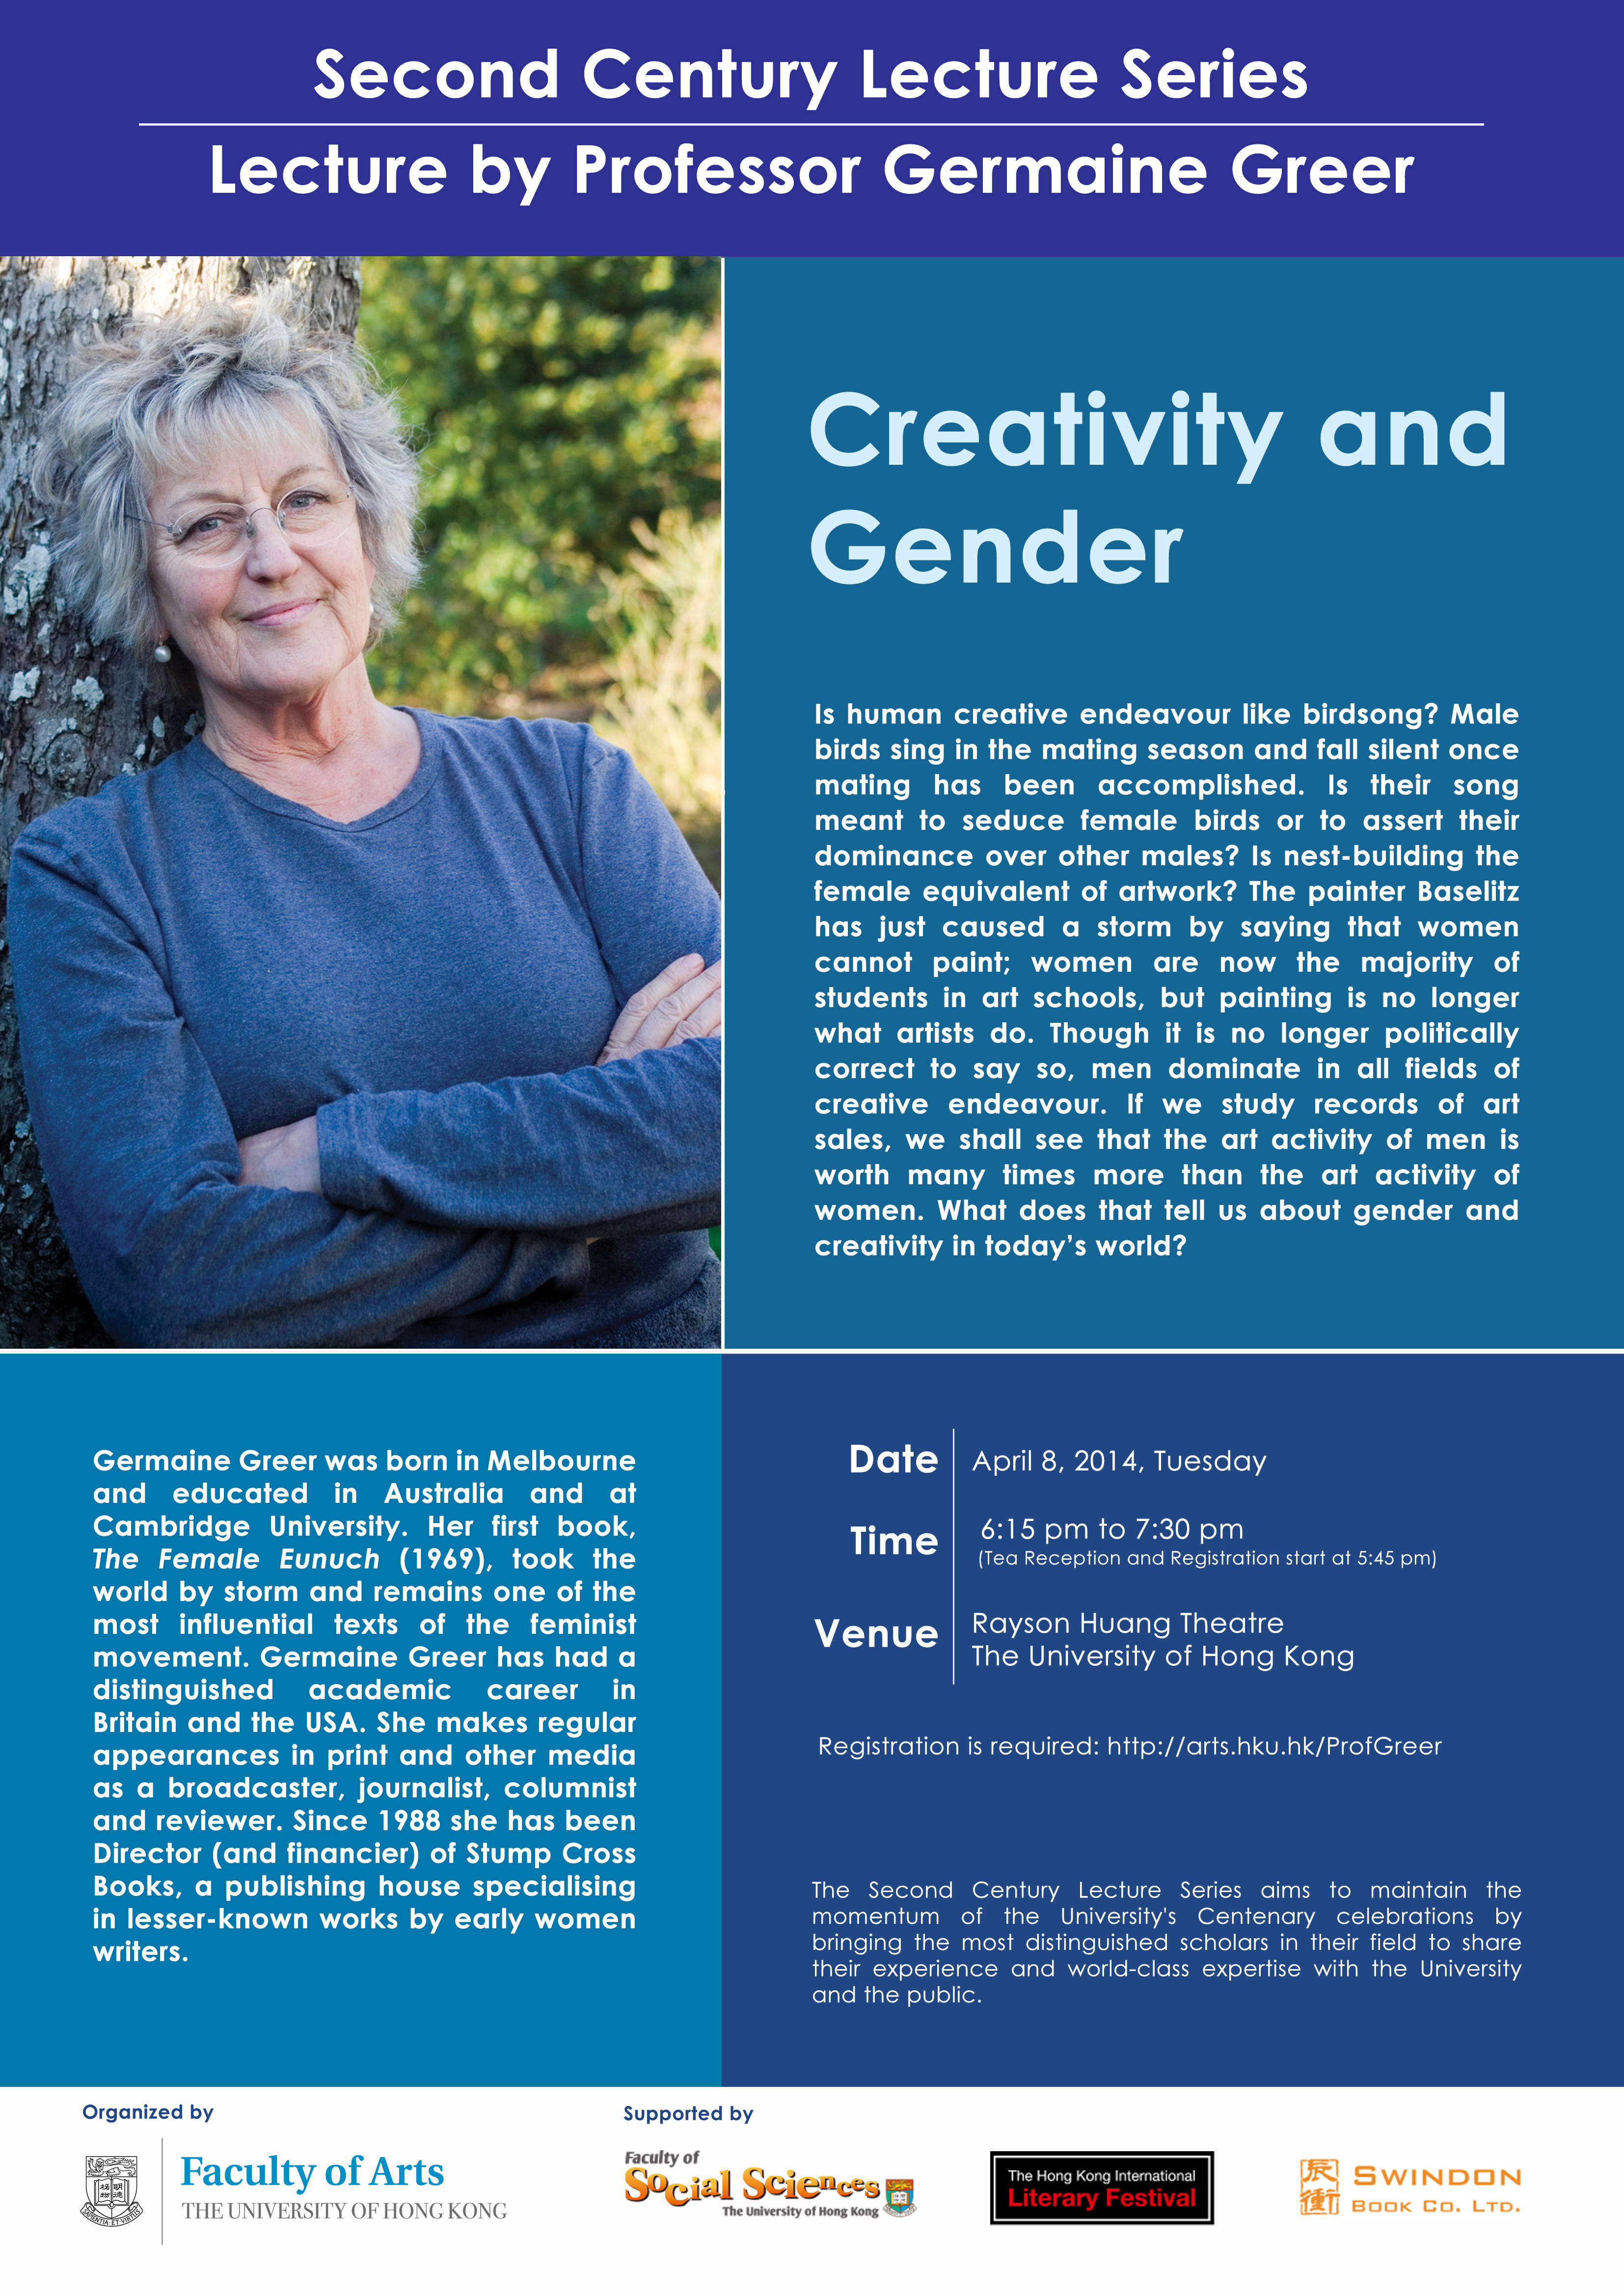 Second Century Lecture Series - Lecture by Professor Germaine Greer: Creativity and Gender 